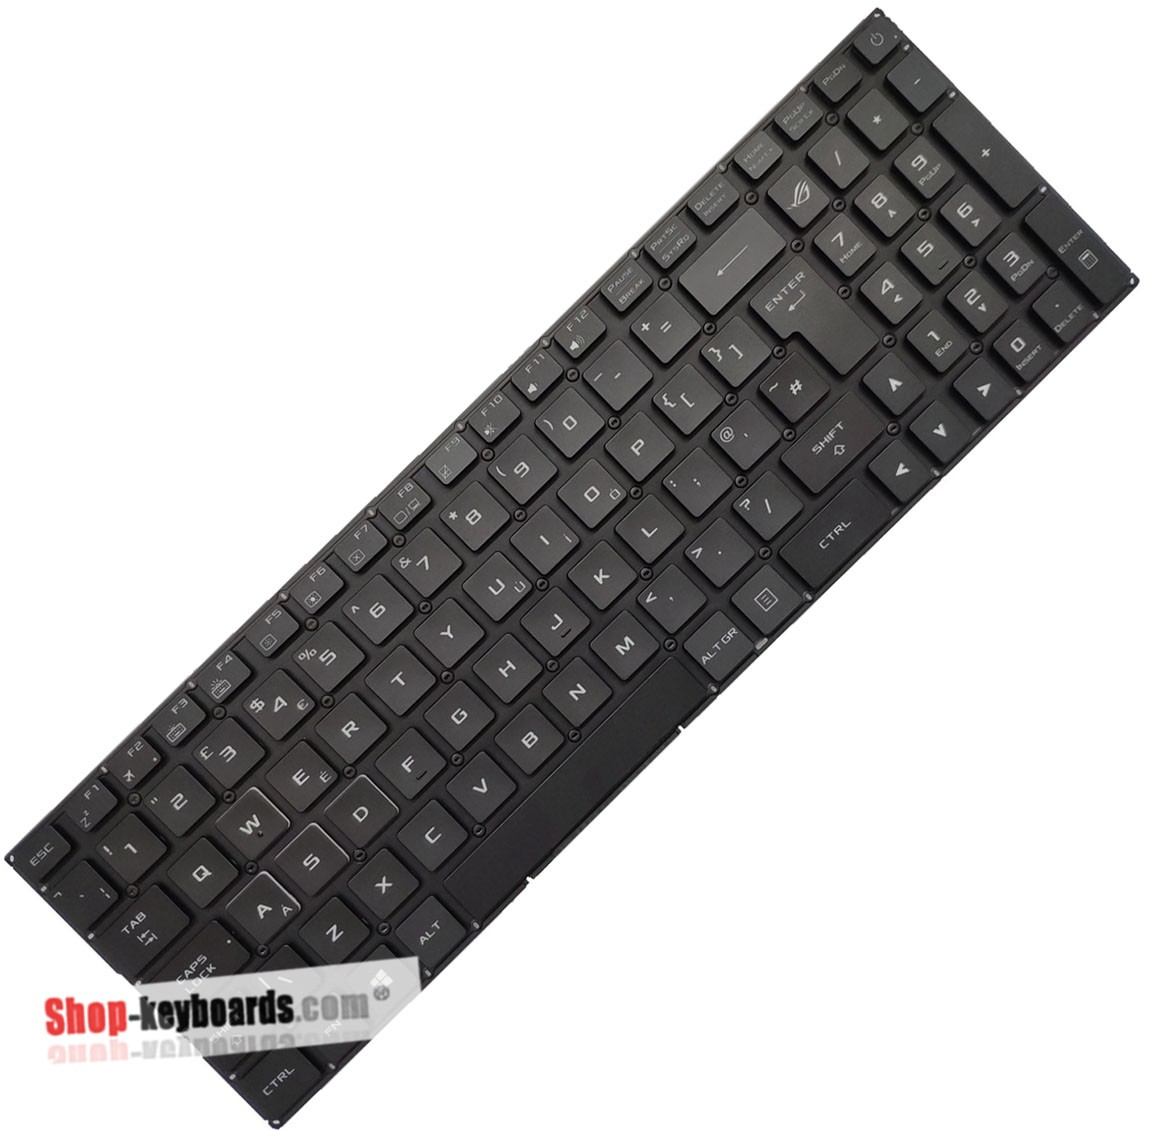 Asus 0KN0-TD1US13 Keyboard replacement